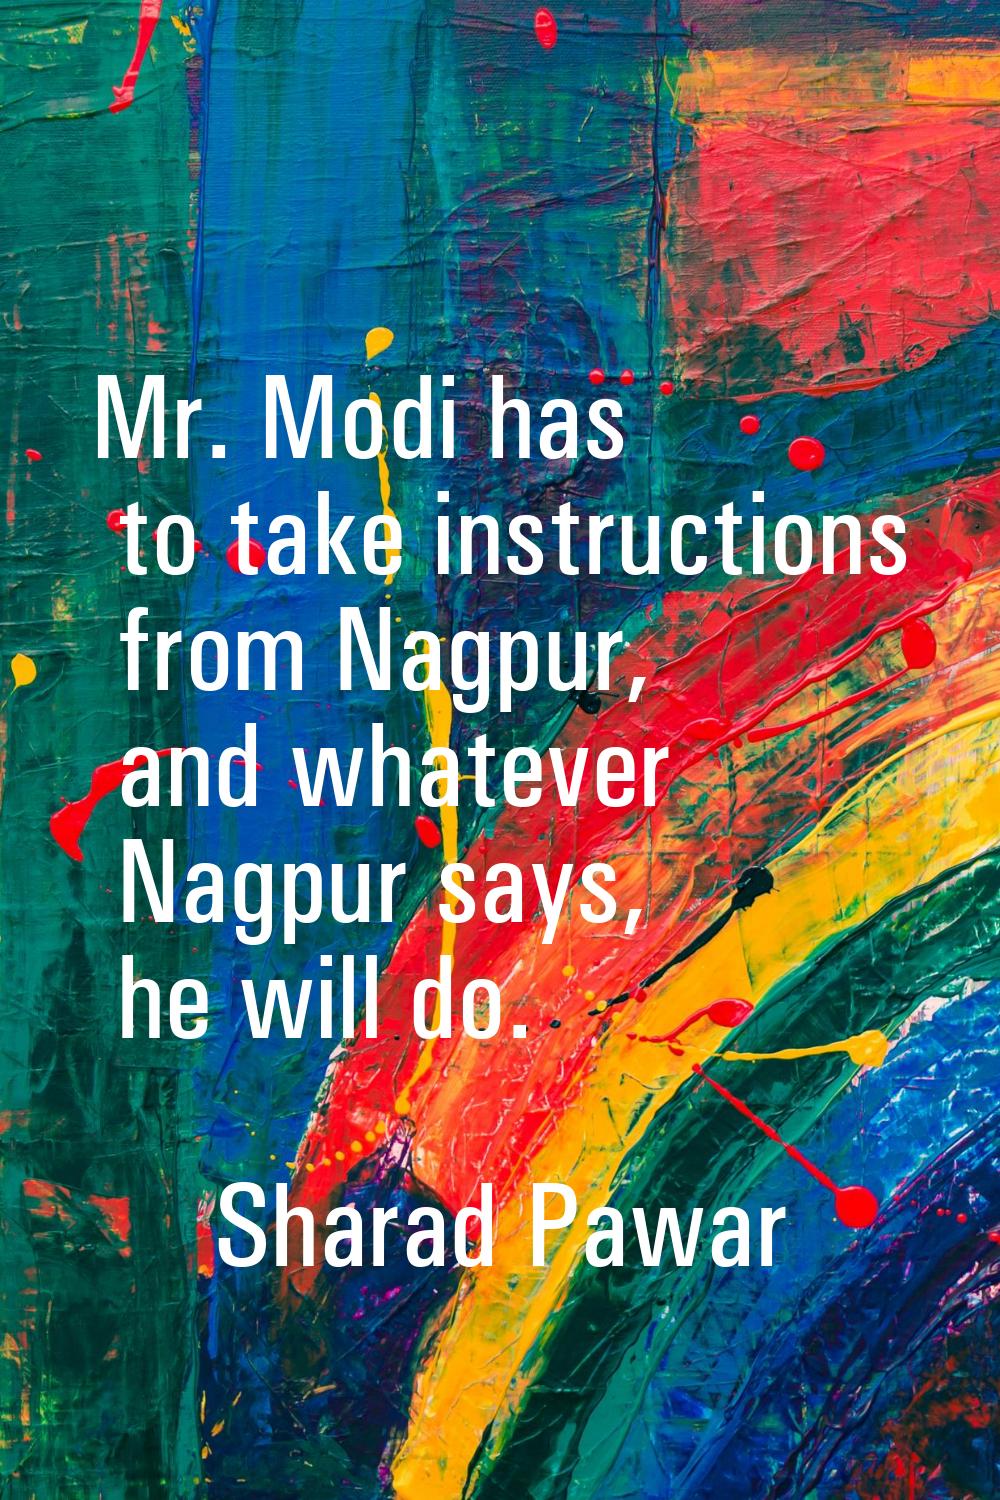 Mr. Modi has to take instructions from Nagpur, and whatever Nagpur says, he will do.